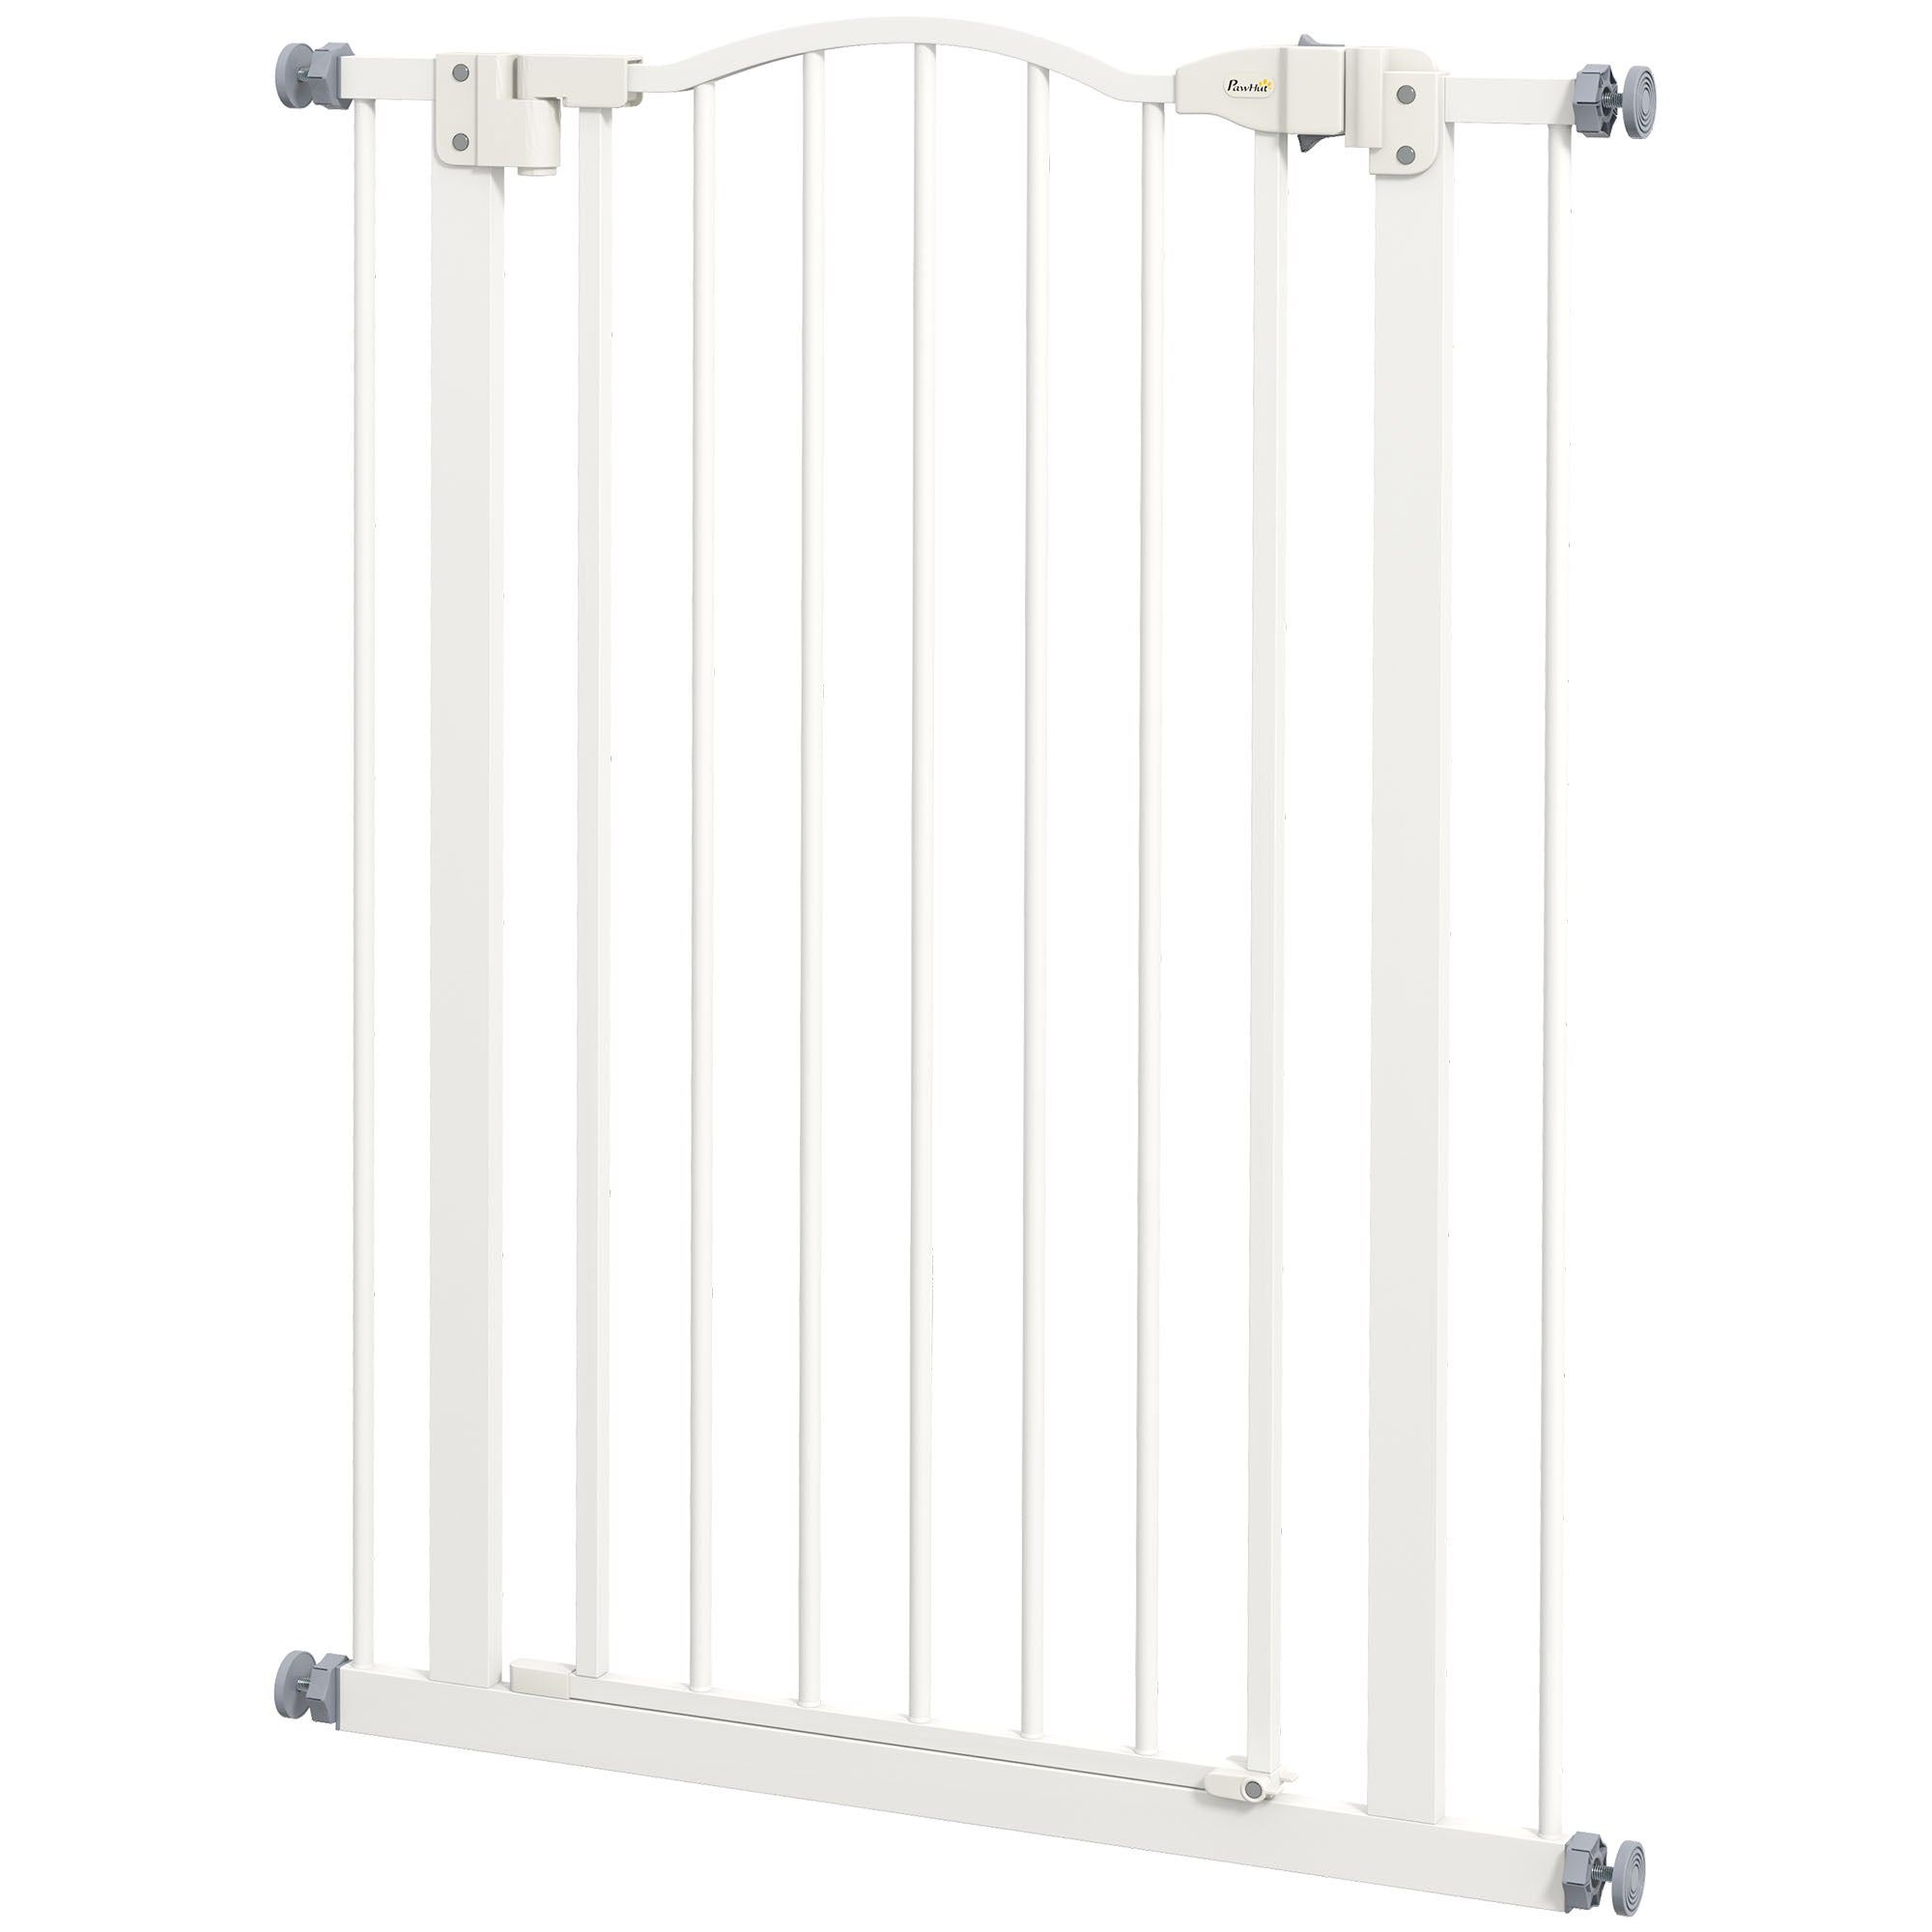 Extra Tall Dog Gate with Door, Pressure Fit, Auto Close, Double Locking for Doorways Hallways Stairs, White - Gallery Canada